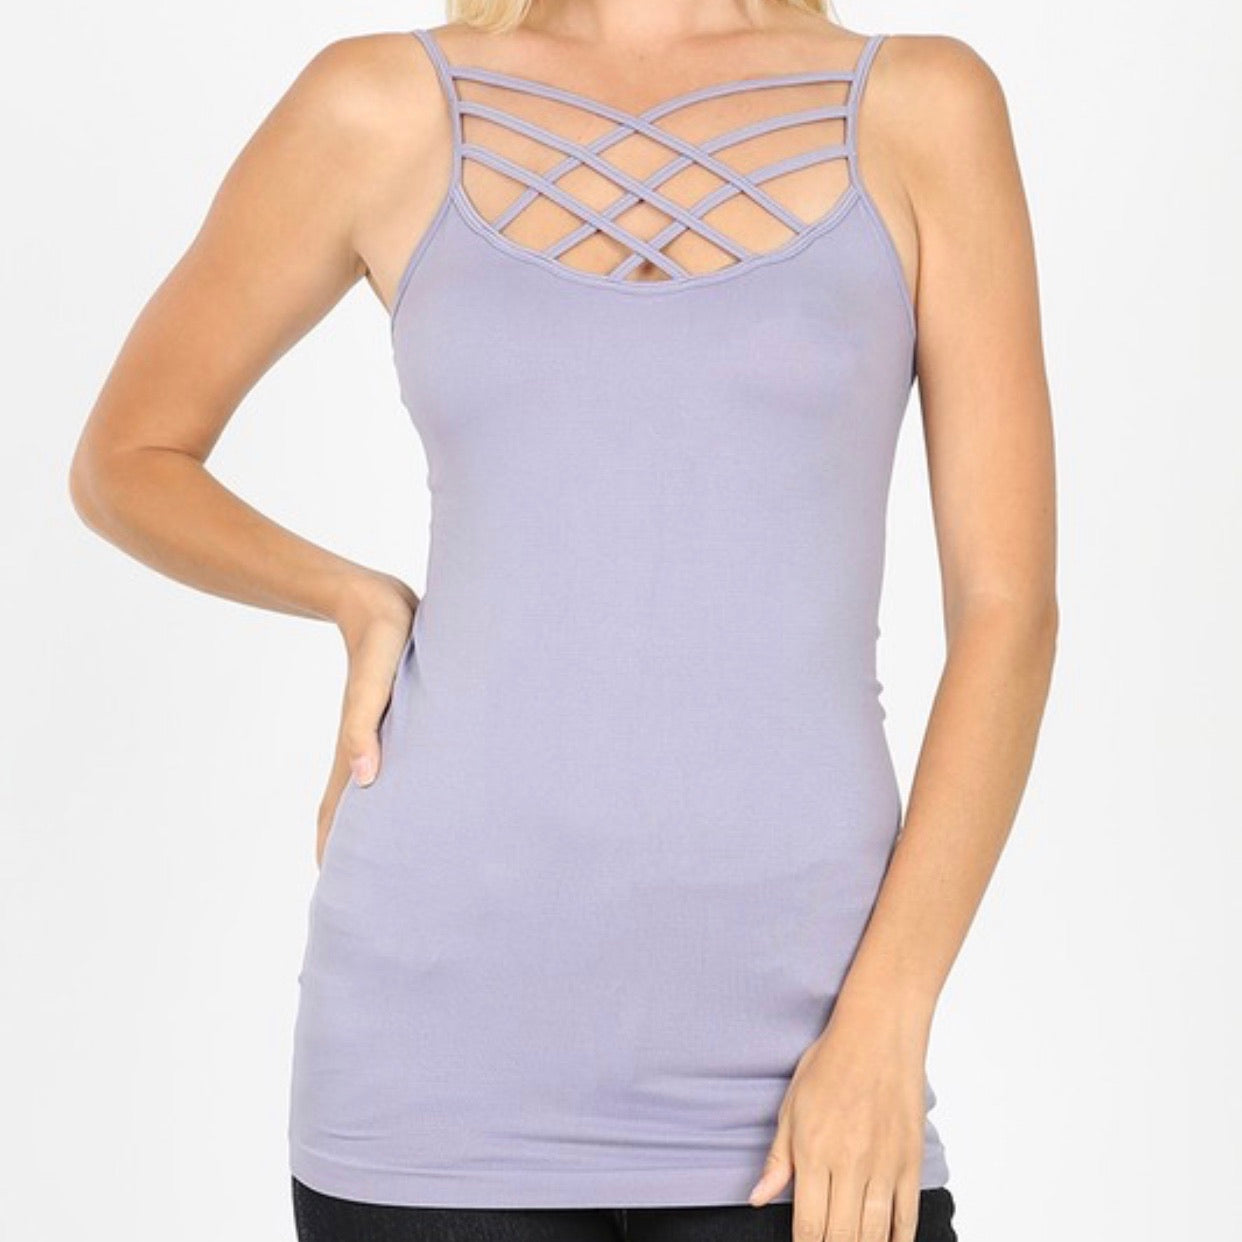 SEAMLESS TRIPLE CRISS-CROSS FRONT CAMI for women plus size stretch crop top undershirt layers lavender purple